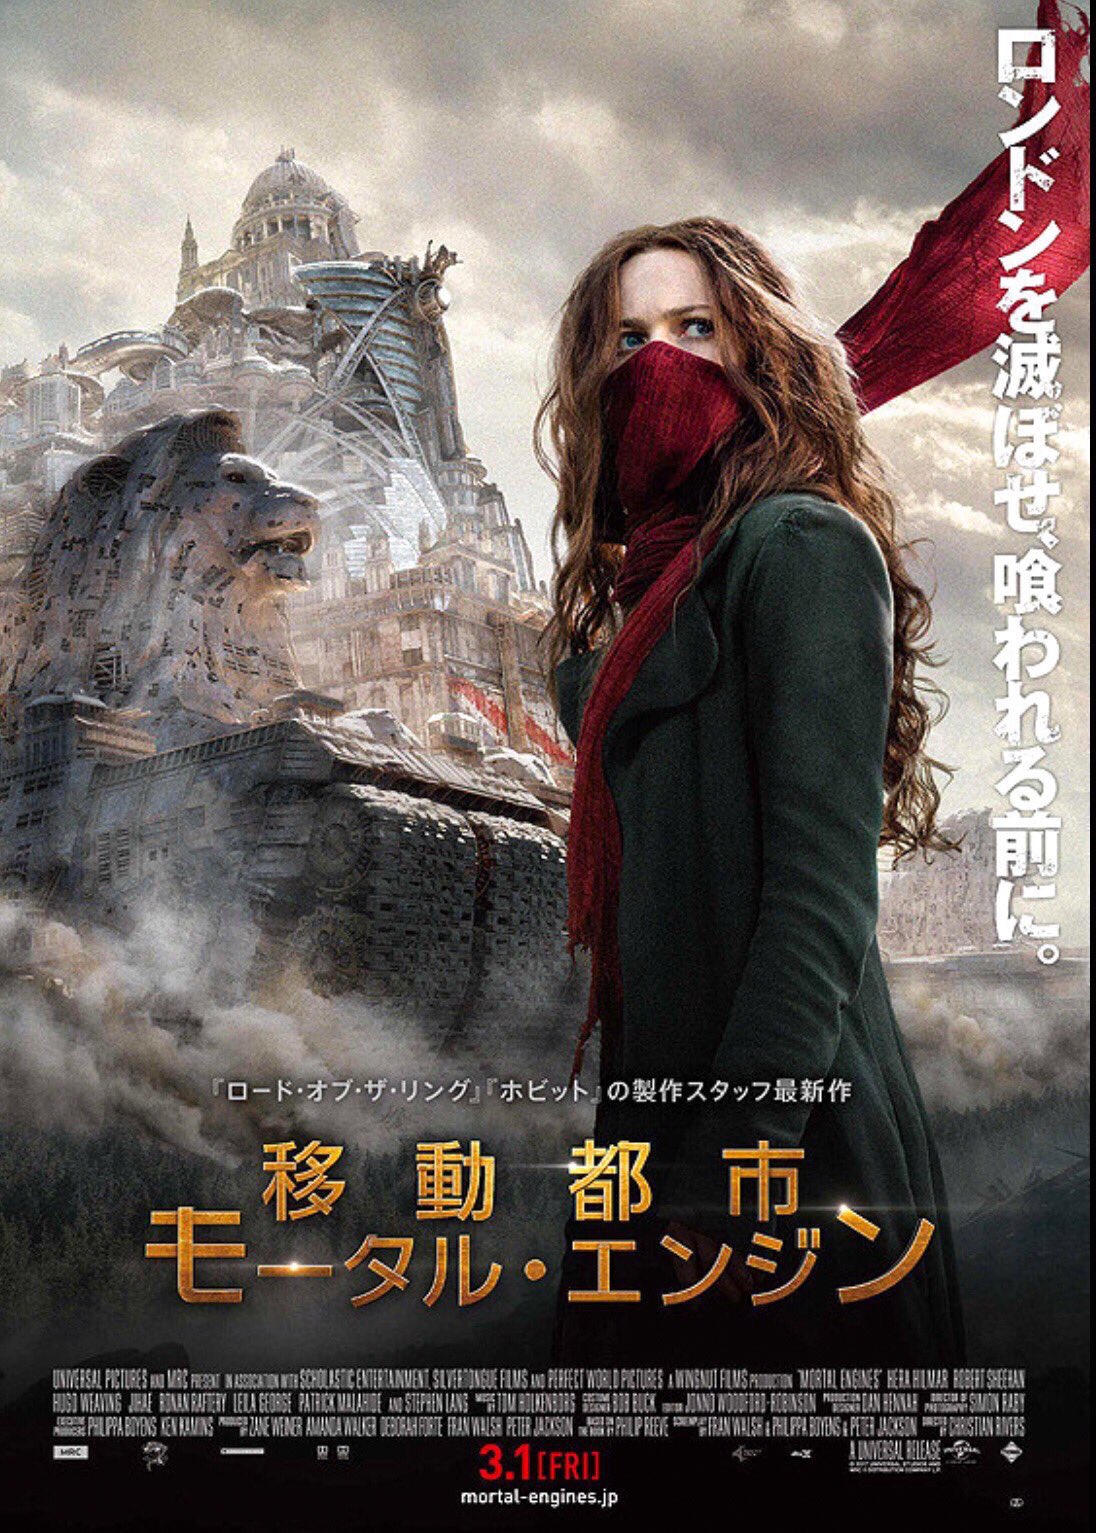 Hideo Kojima Saw Mortal Engines I Wanted To See Japanese Dub Version But Saw It With English Subtitles Time Time At The Theater I Bought The Pamphlet And Magazine Called Screen